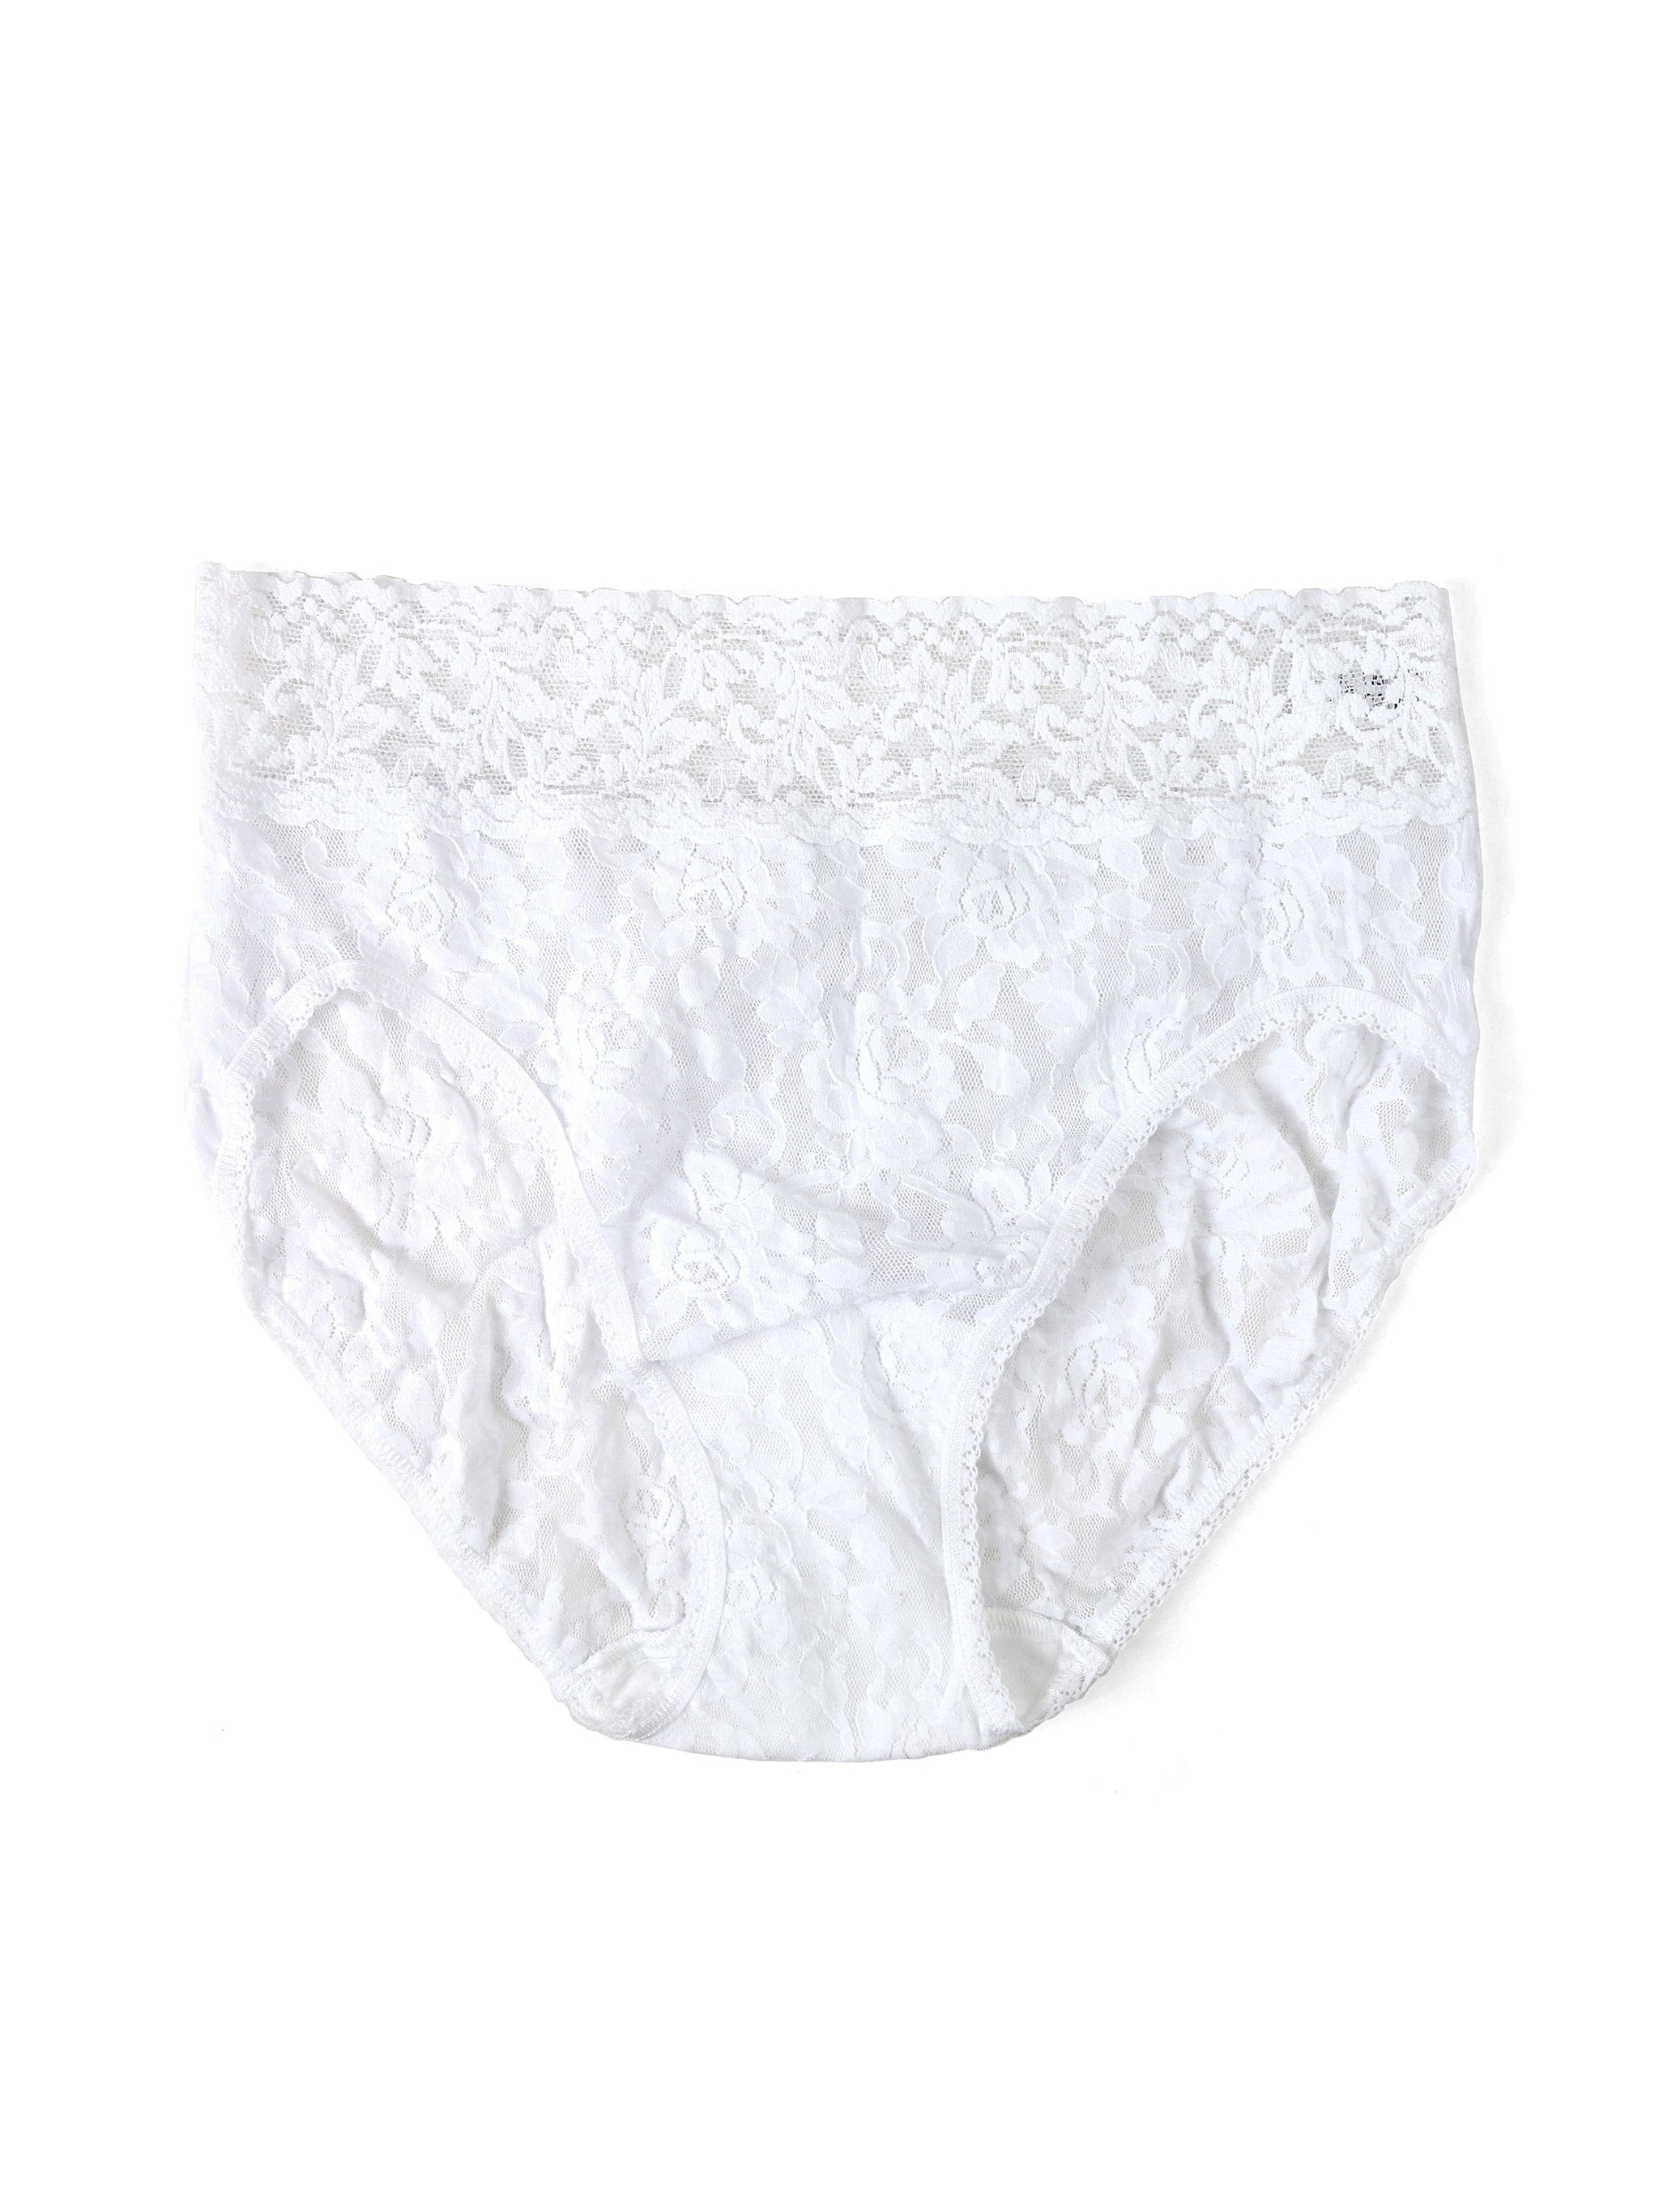 SIGNATURE LACE PLUS SIZE FRENCH BRIEF